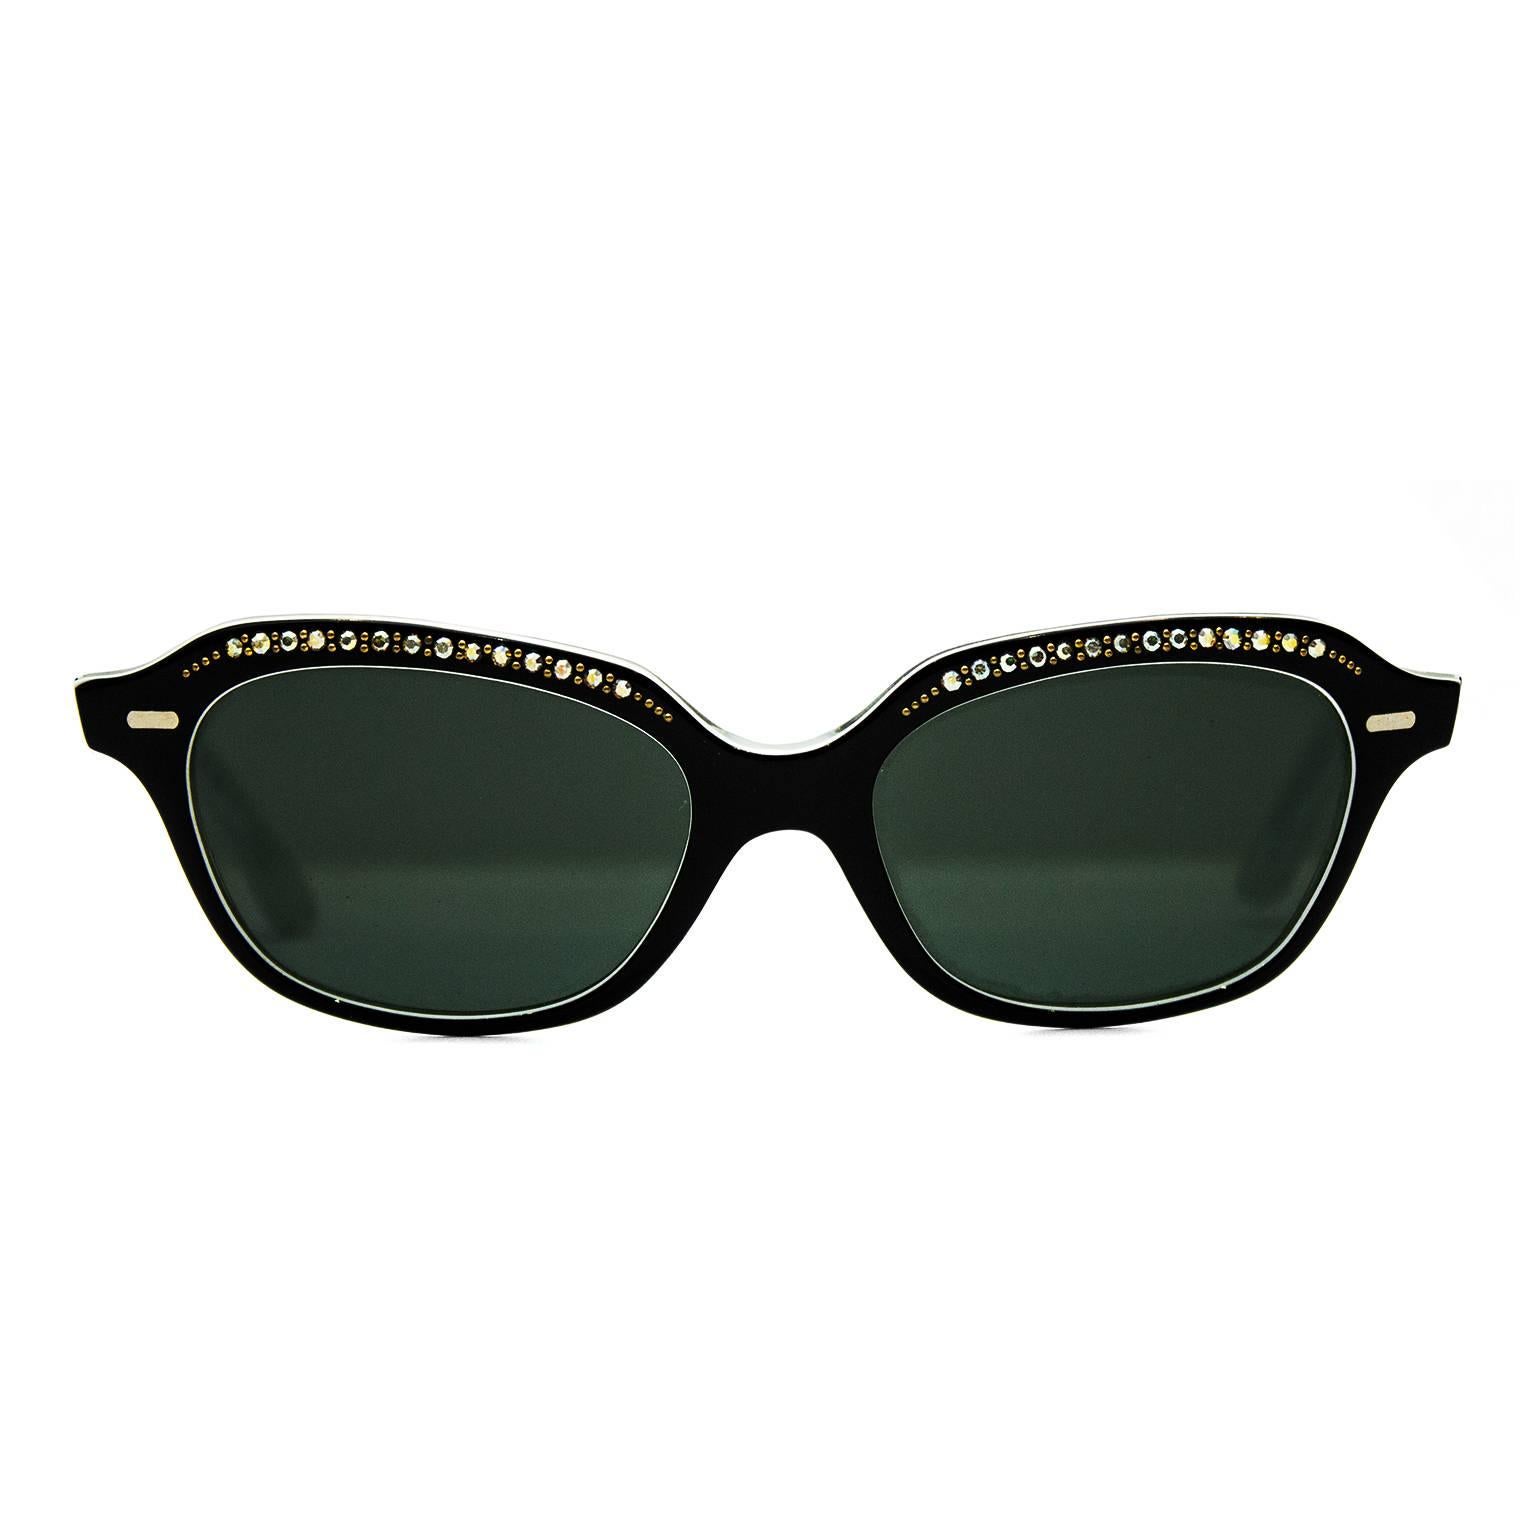 1990s Chanel Black Sunglasses with Gold Stars at 1stDibs | chanel star  sunglasses, chanel studded sunglasses, 90s chanel sunglasses